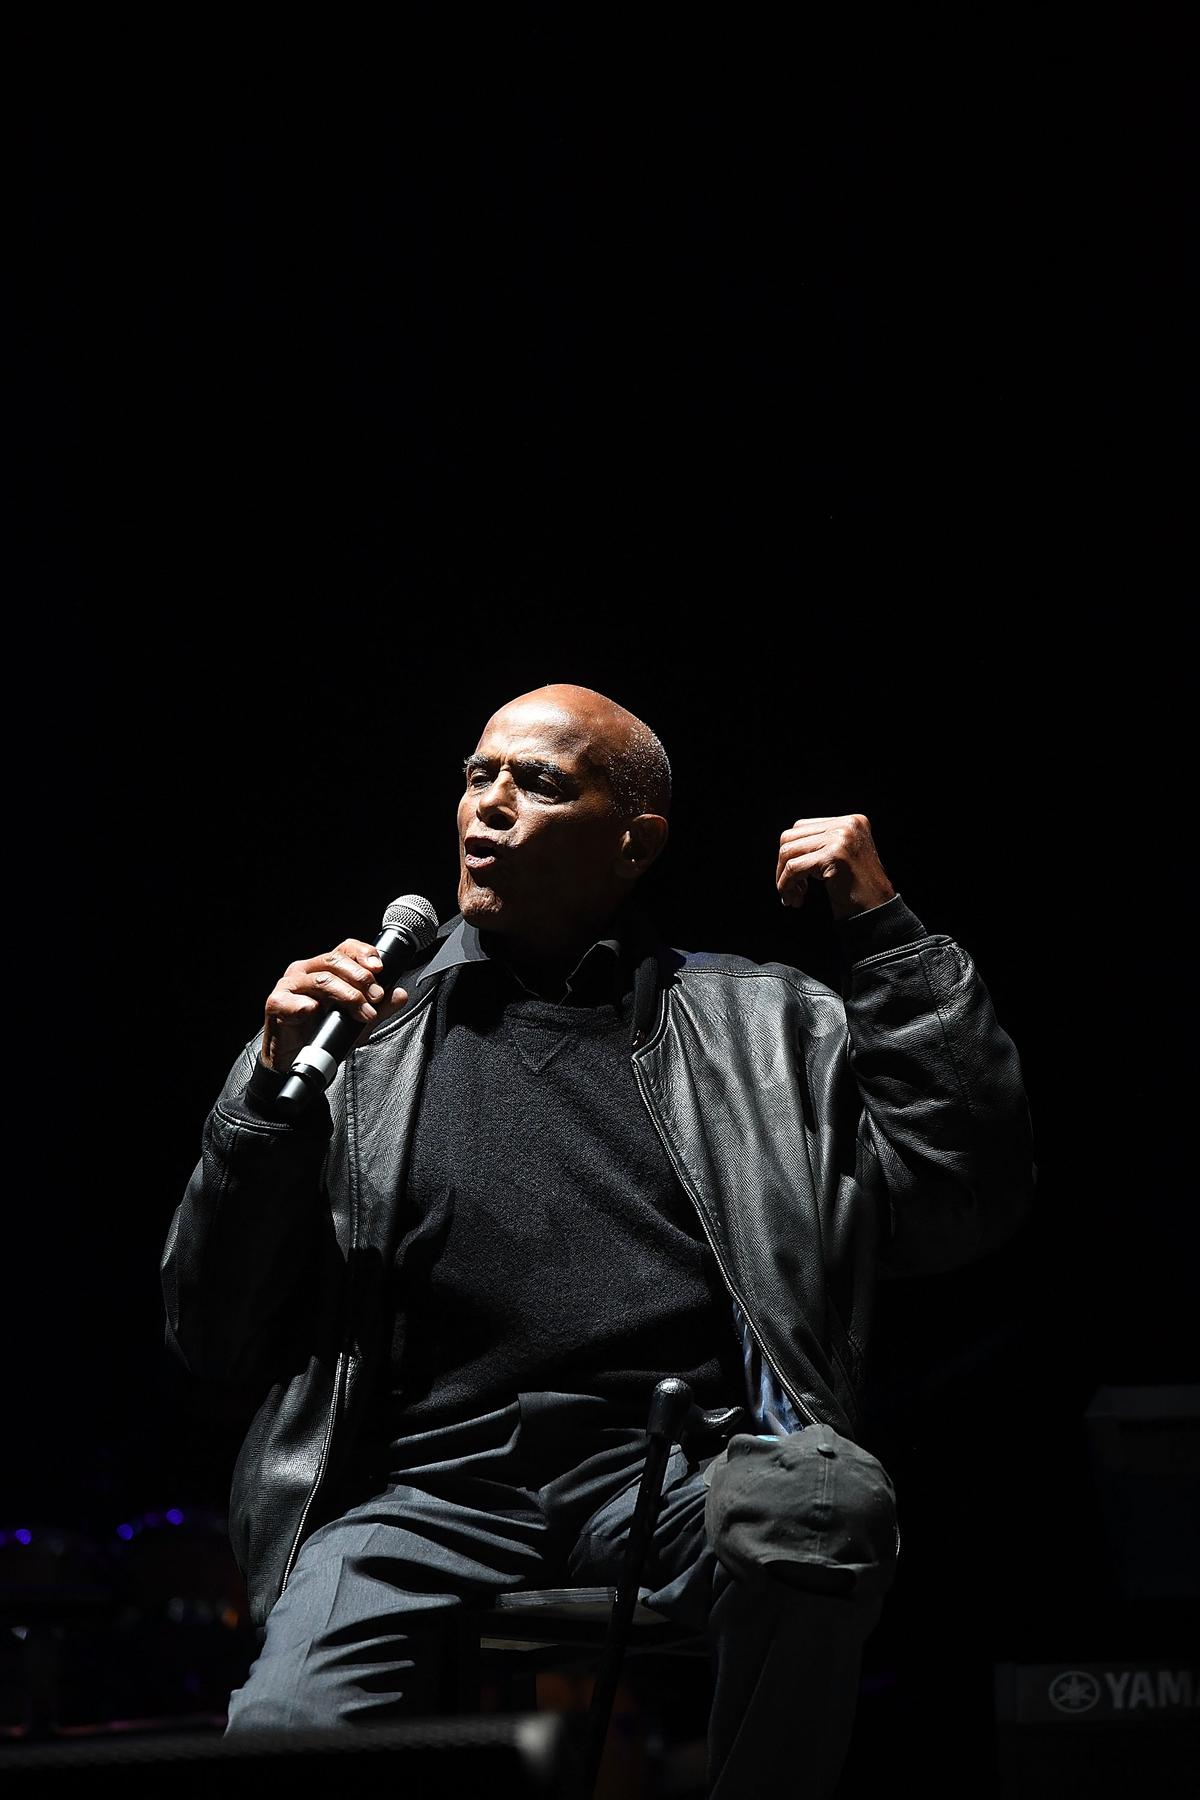 Harry Belafonte performing on stage at the Meany River to Cross Festival in Georgia